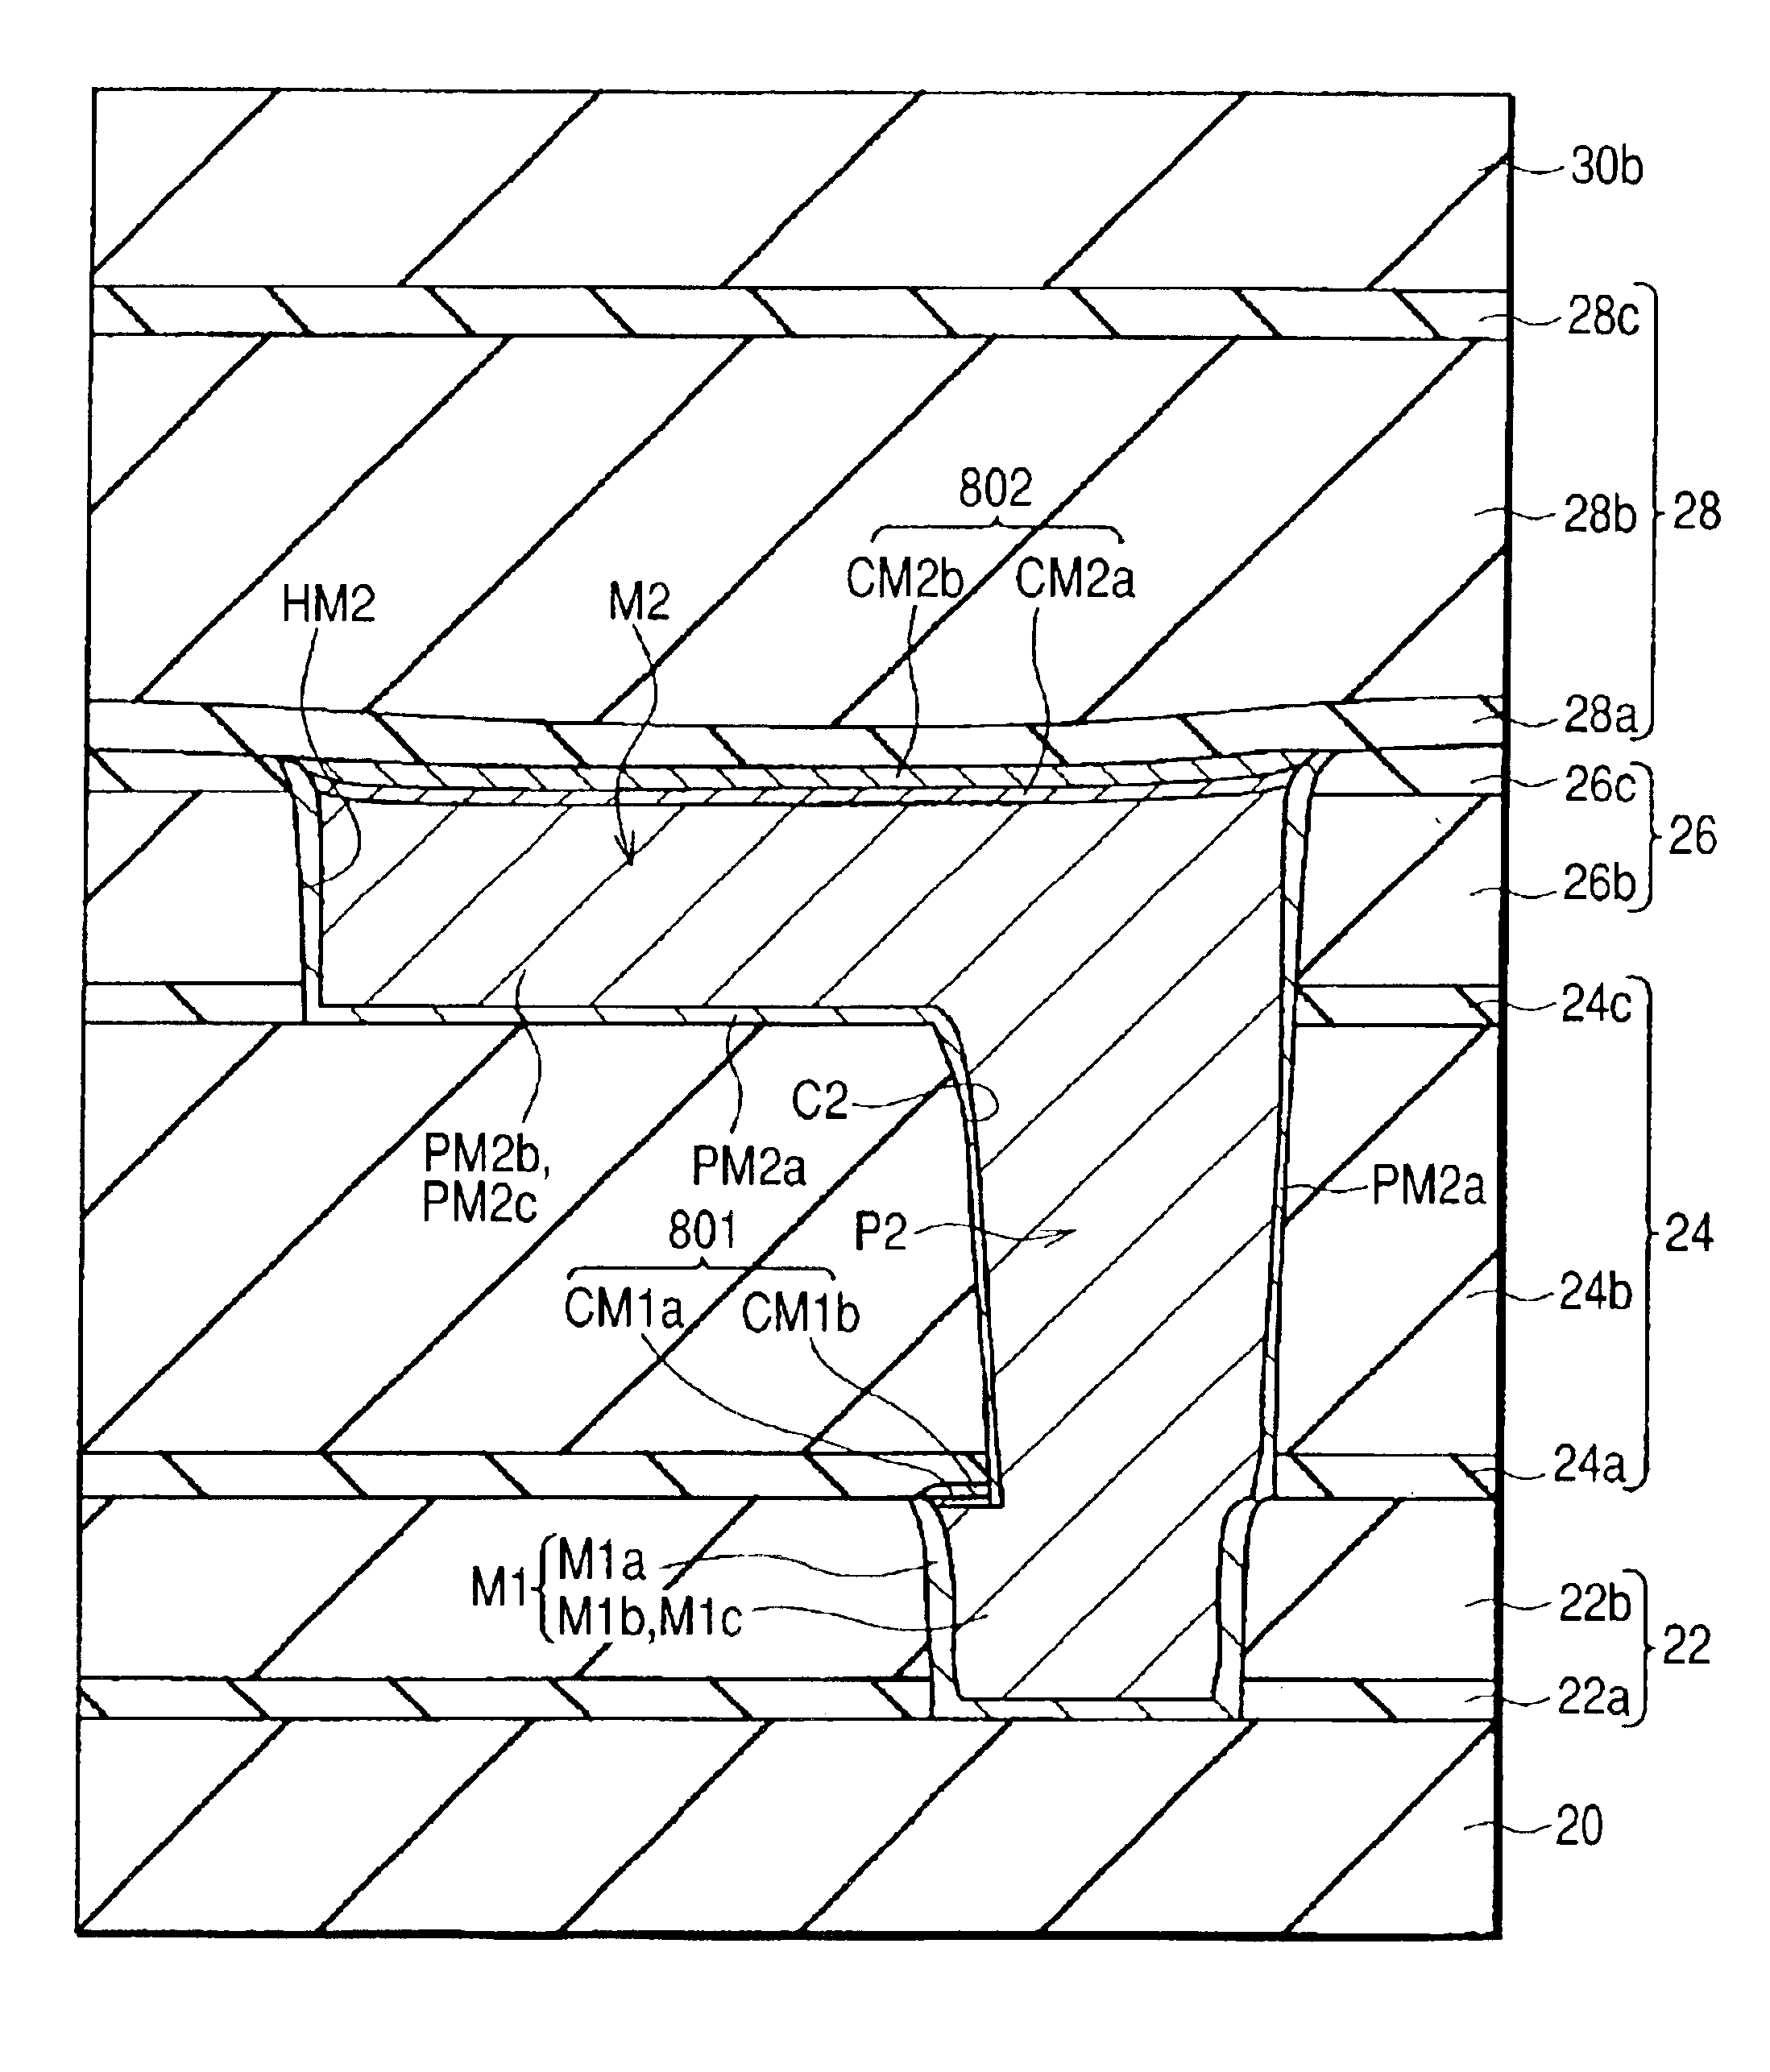 Method of manufacturing a semiconductor device having an interconnect embedded in an insulating film